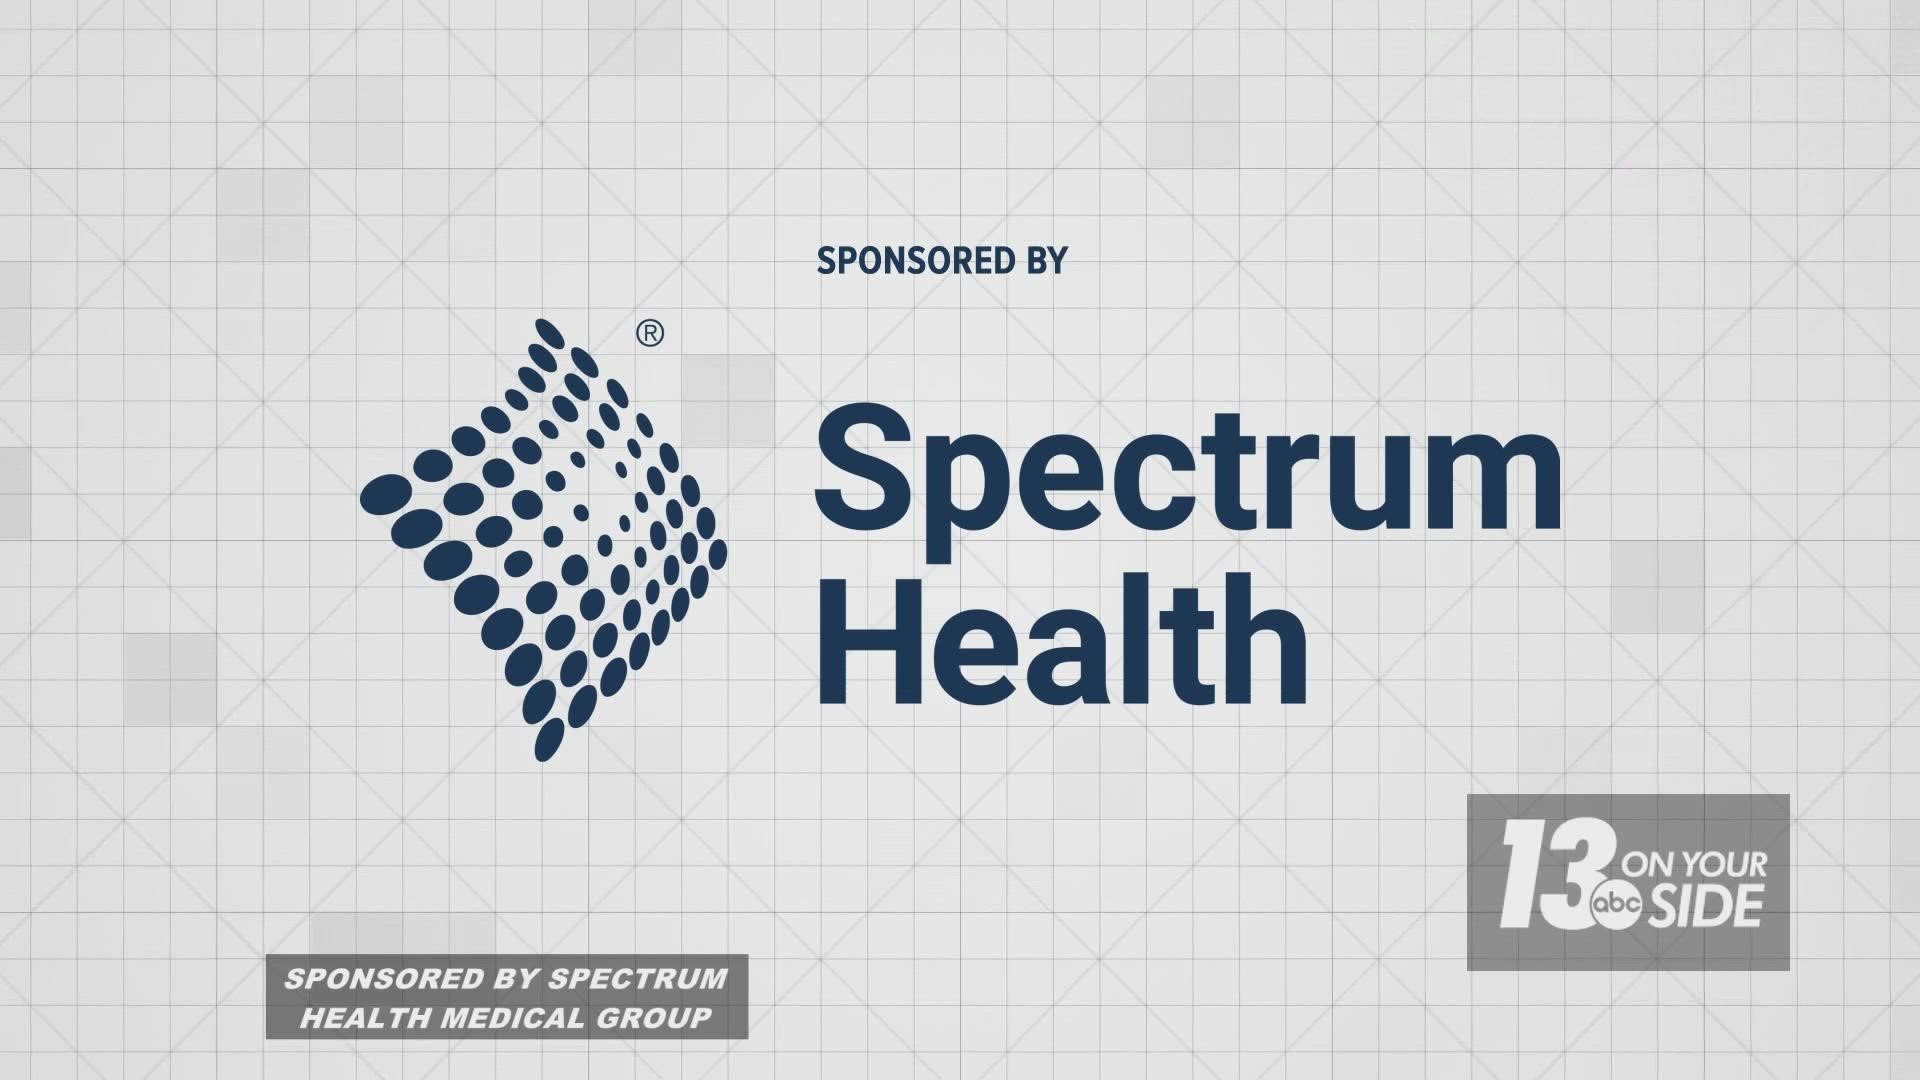 Heather Glenn and Nancy Roberts are prenatal educators at Spectrum Health. They talked about why pre/postnatal support and education are so important.